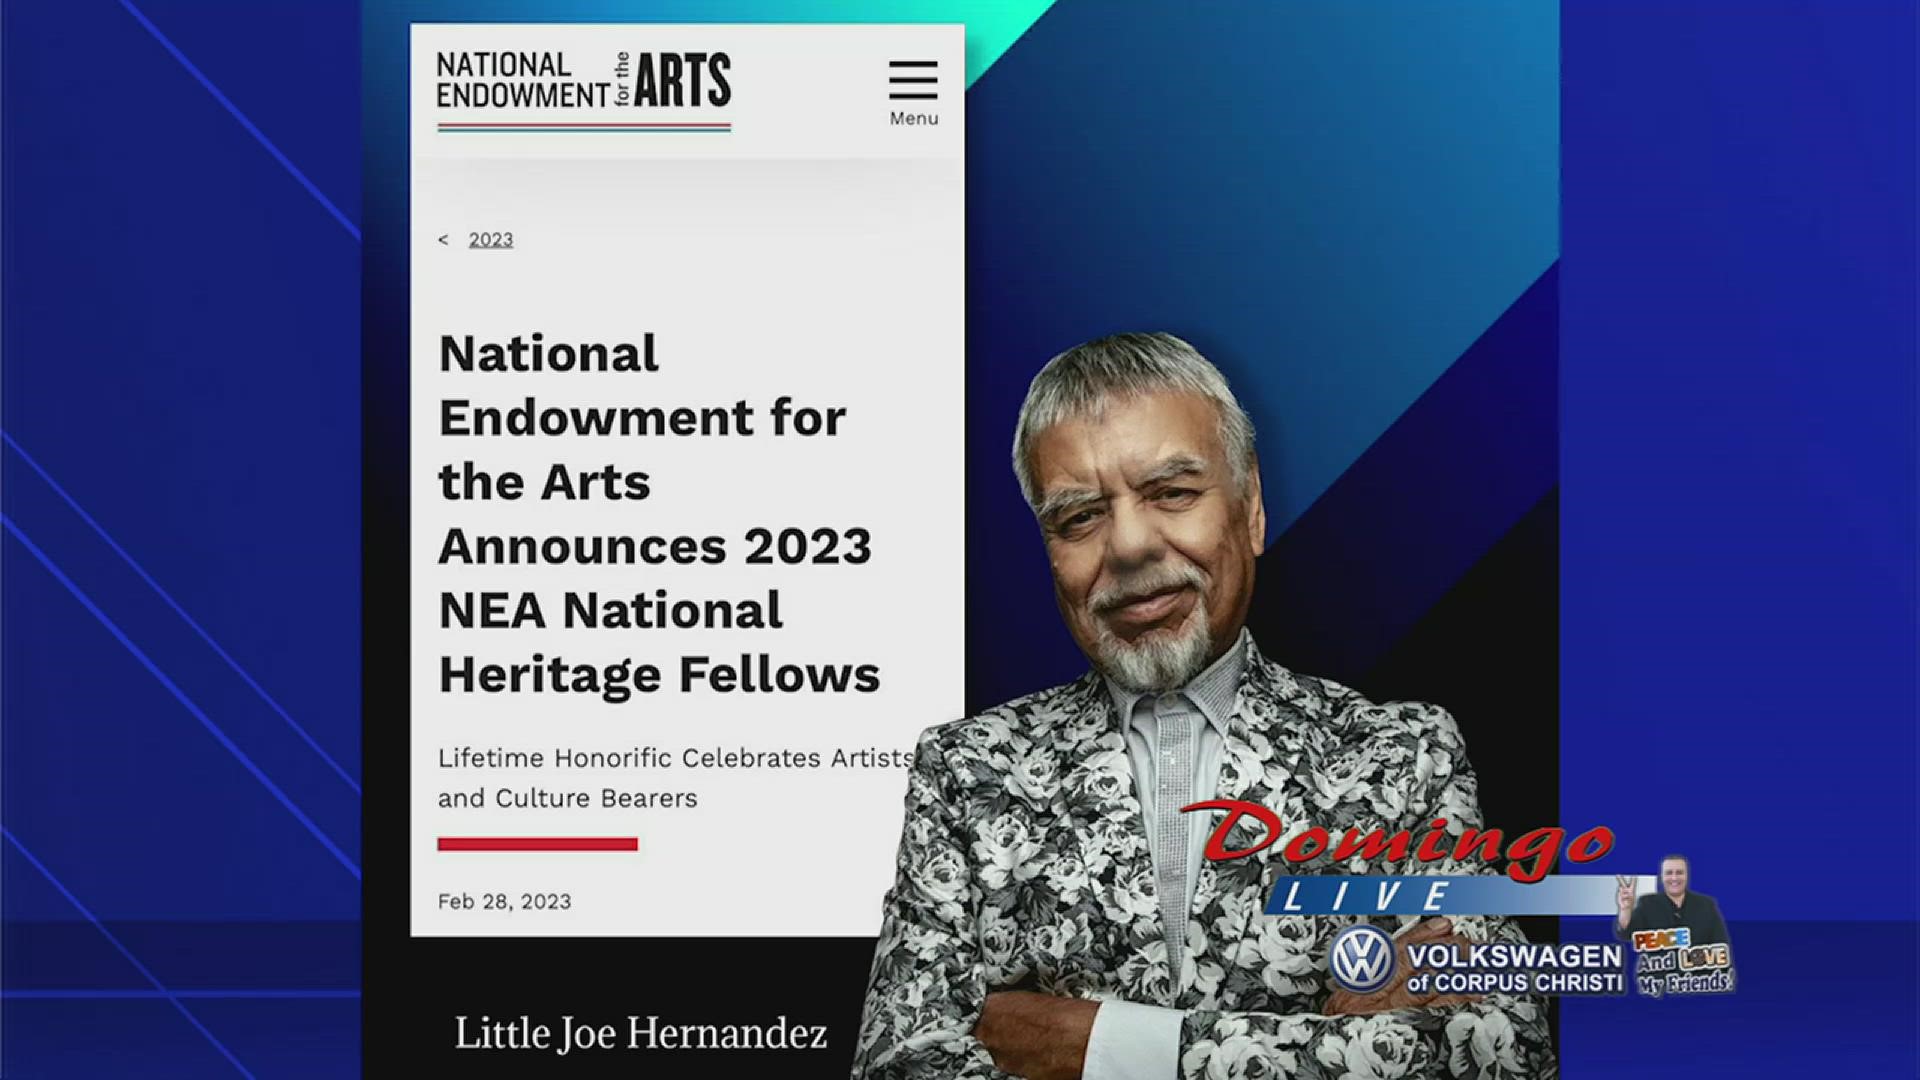 Congrats, 2023 NEA National Heritage Fellow Little Joe! Here's a sneak peek of our exclusive interview with him, as well as Rudy's and Barbi's discussion about it.